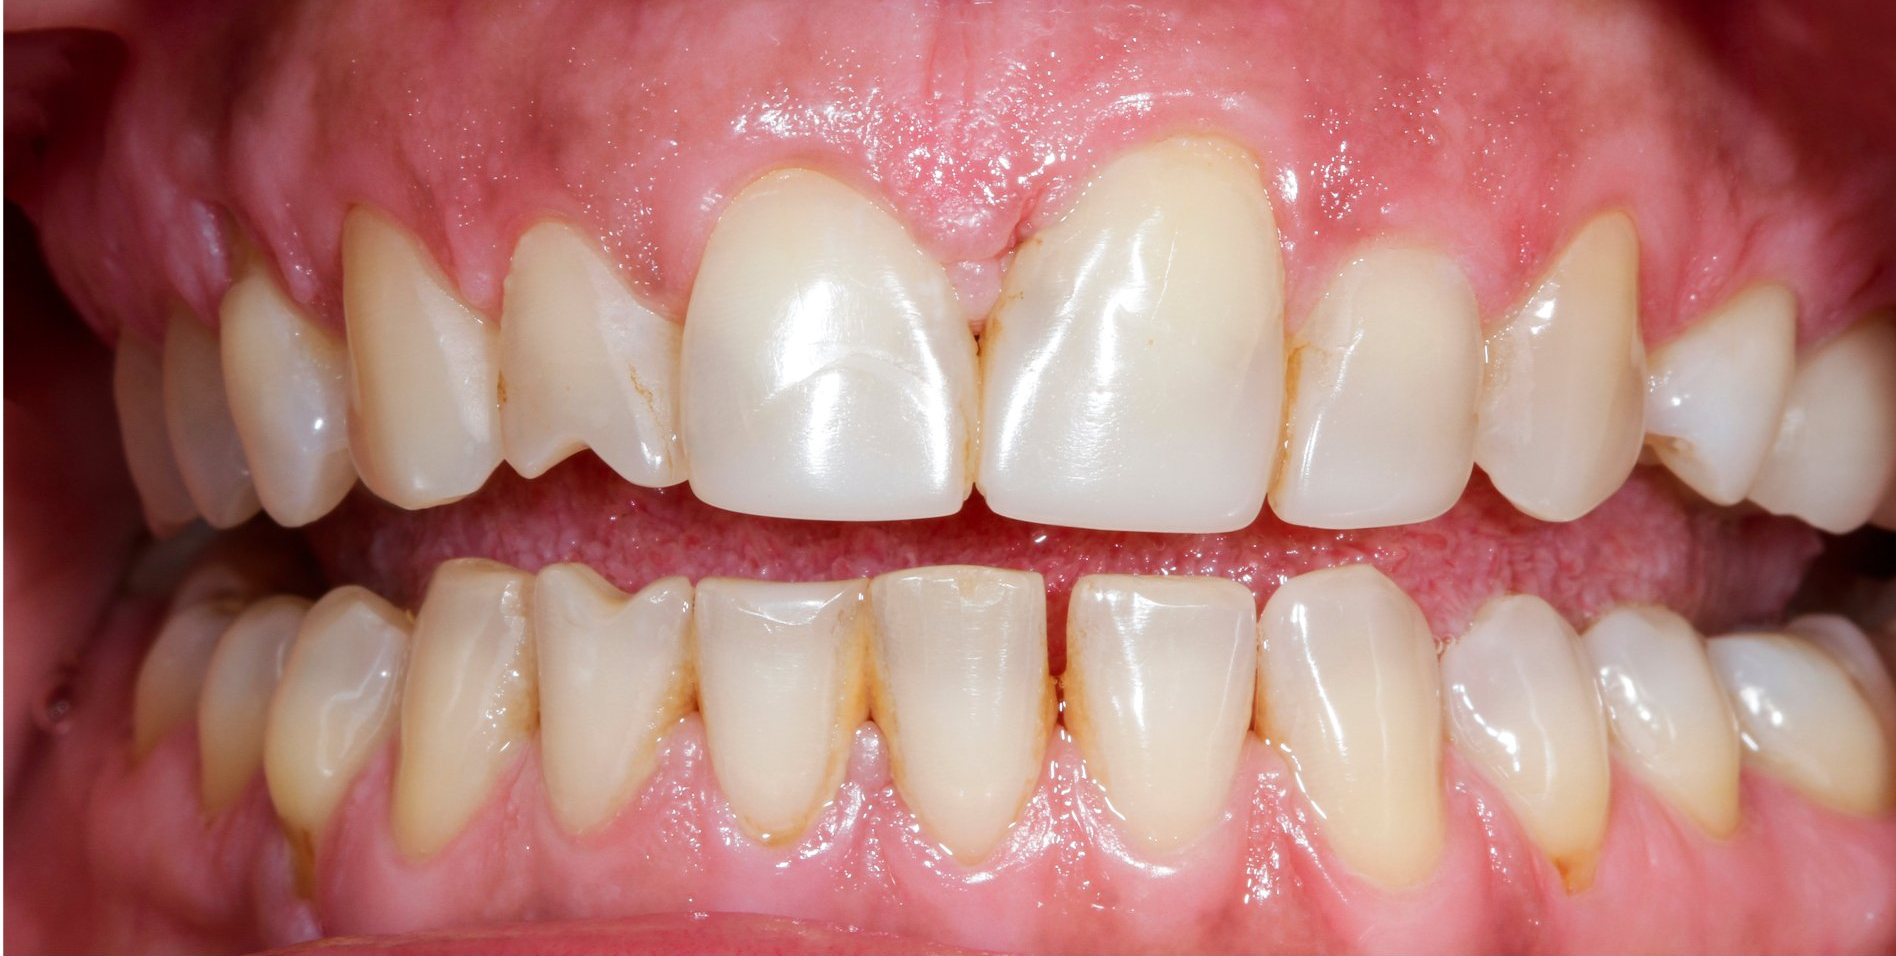 A close up of a person 's teeth with a missing tooth.